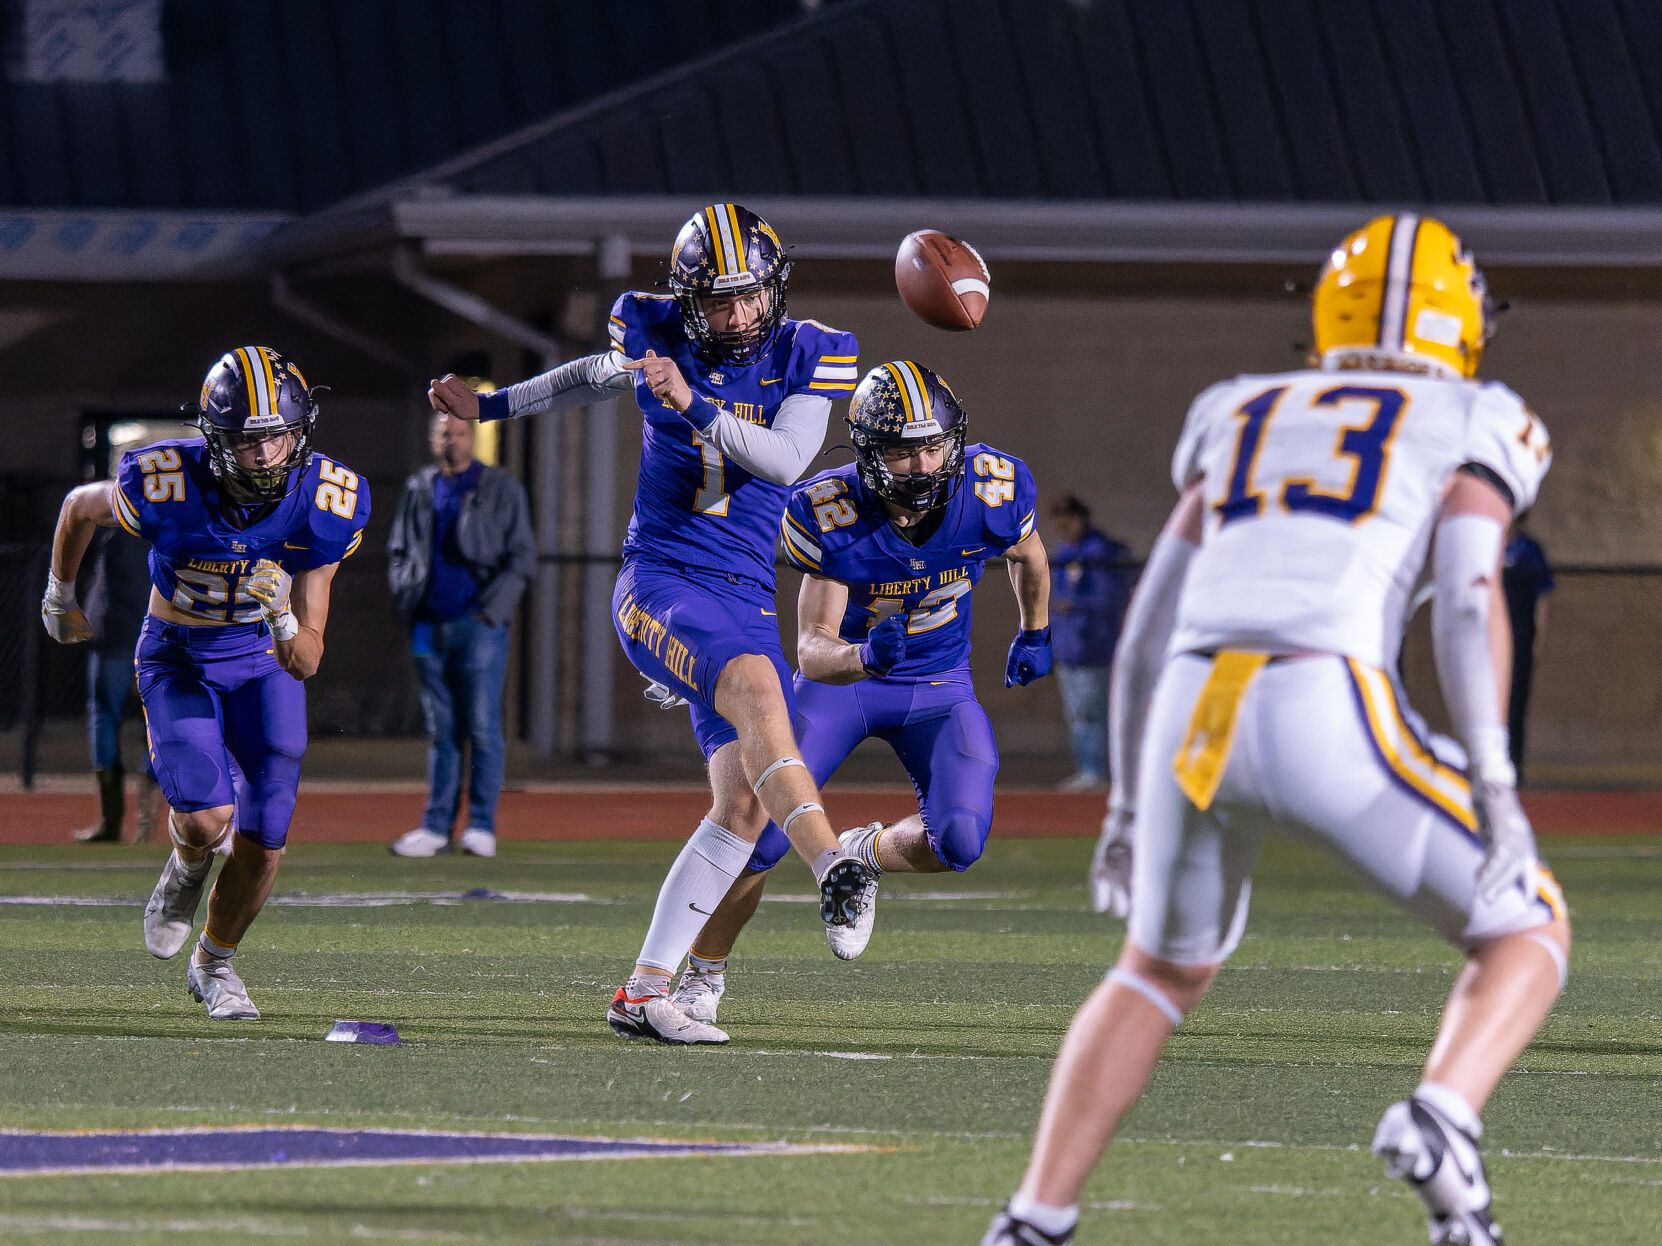 Liberty Hill Panthers suffer 33-23 defeat to Pieper Warriors, settle for second place in district standings